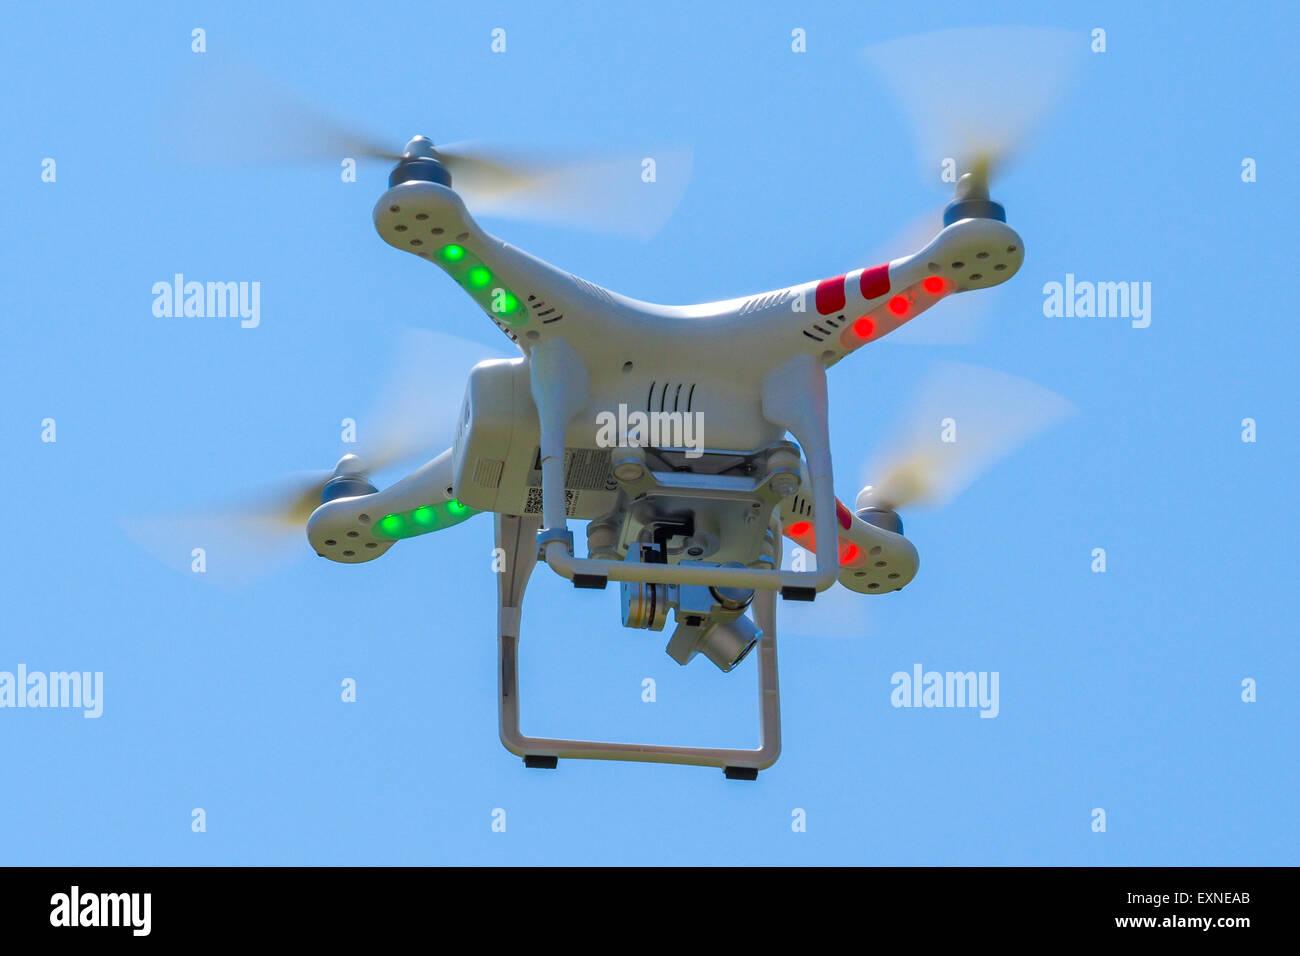 Bottom view of a drone flying with a video camera system Stock Photo